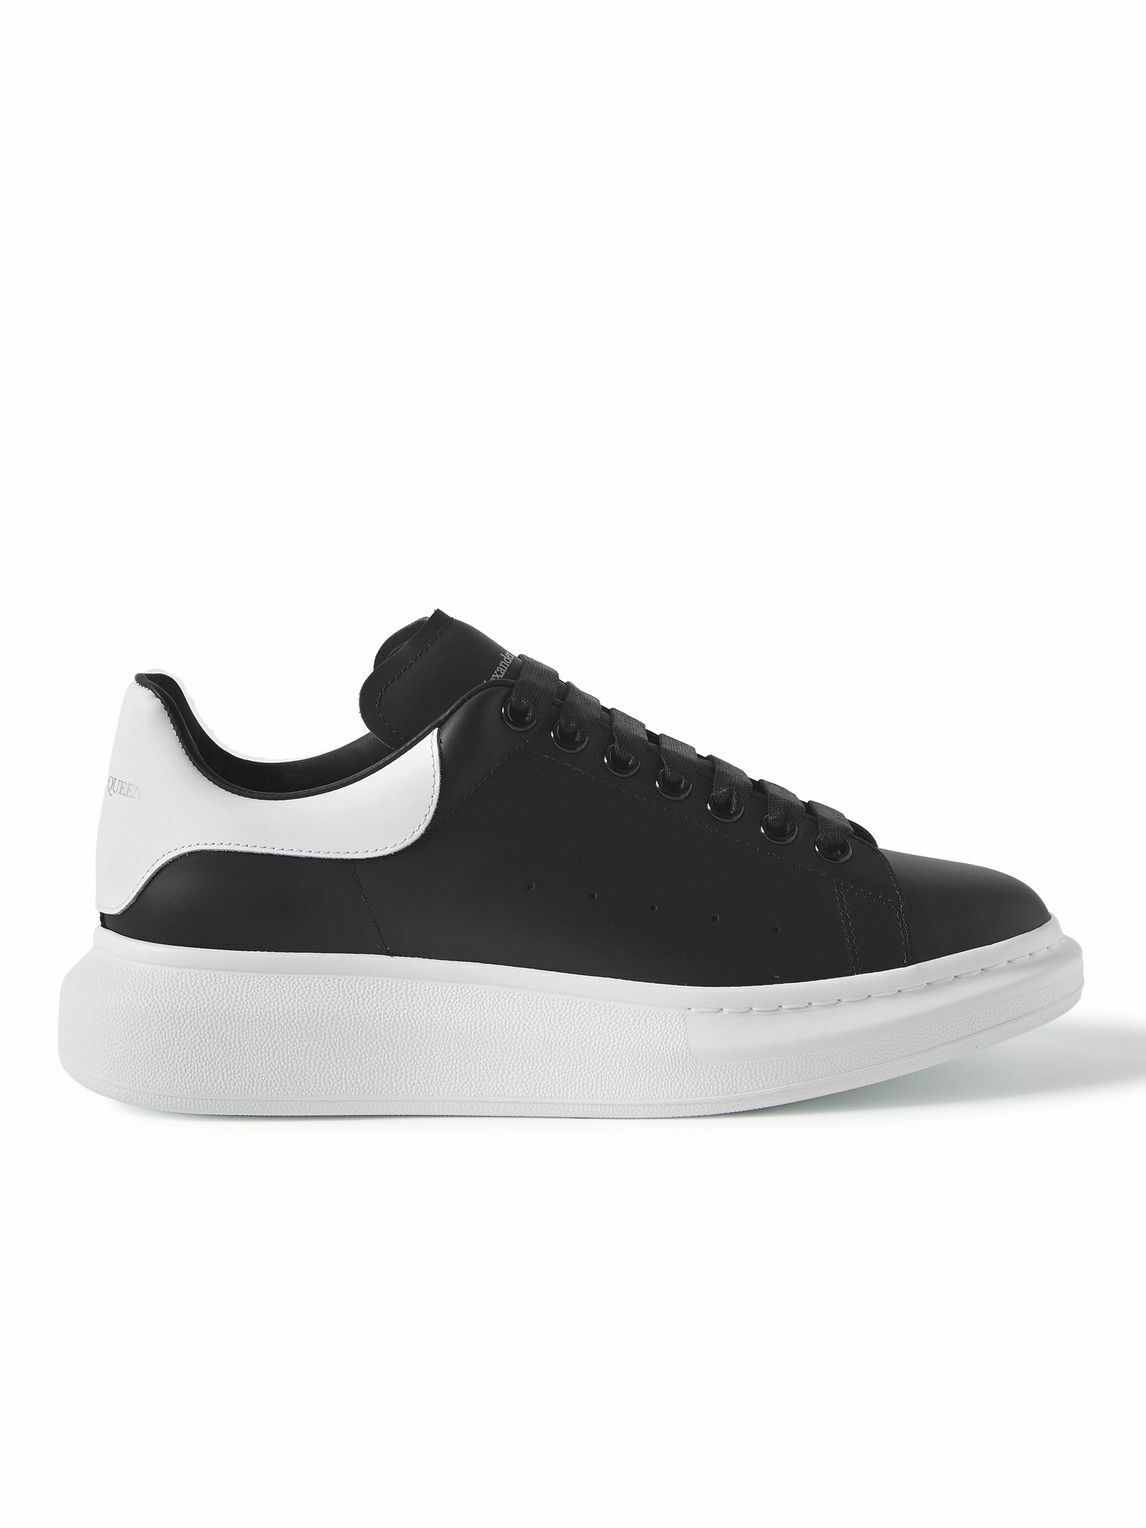 Alexander McQueen - Exaggerated-Sole Leather Sneakers - Black Alexander ...